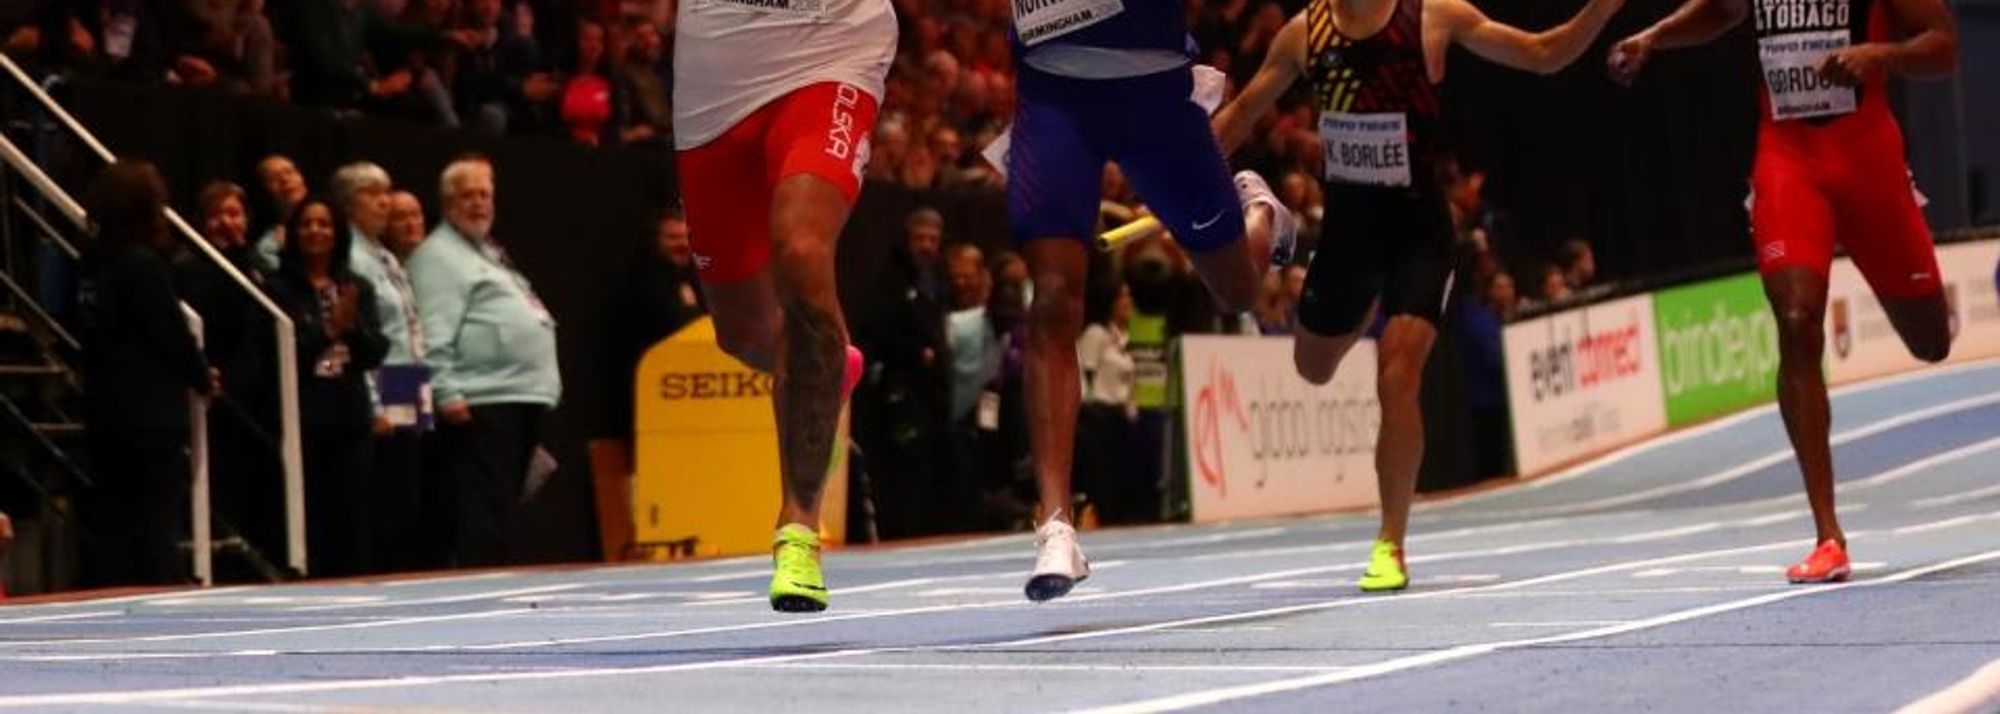 A surprise world indoor record* for Poland, a third world indoor title for Renaud Lavillenie and a hometown hero taking gold were among the final highlights of the IAAF World Indoor Championships Birmingham 2018.